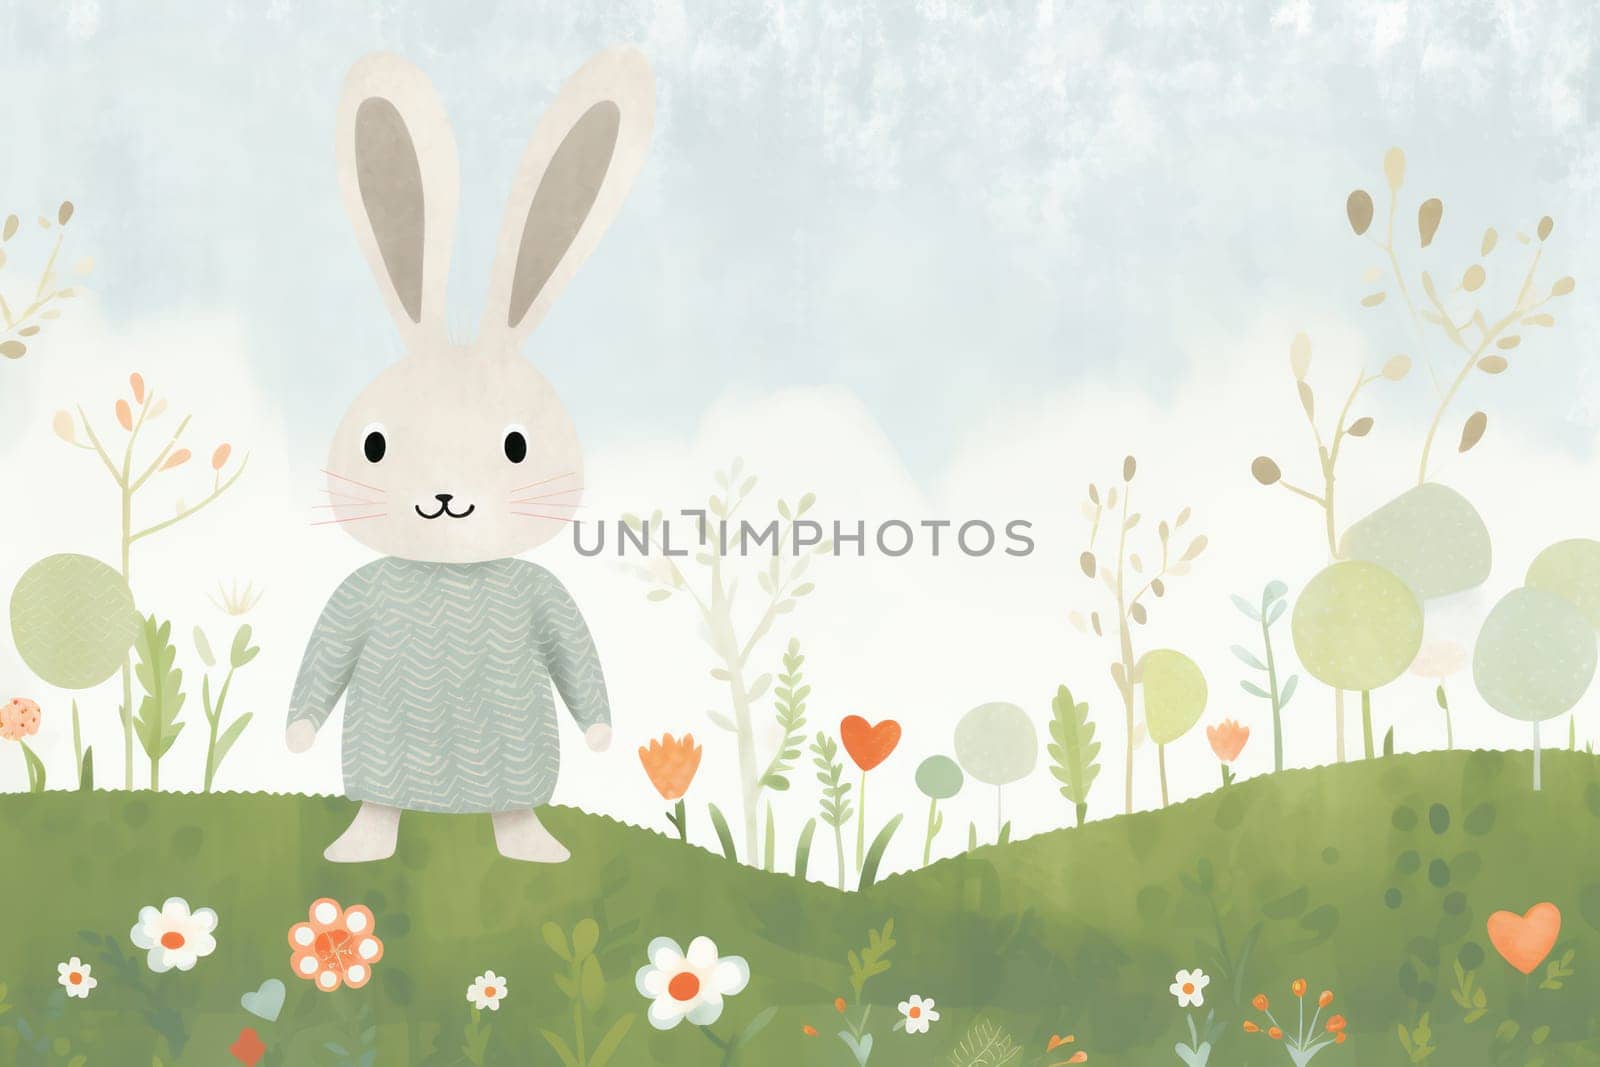 Cute Bunny Cartoon Illustration on Lovely Easter Card - A Funny Bunny with Pink Ears Surrounded by Beautiful Flower Patterns, Standing on Green Grass under Blue Sky.